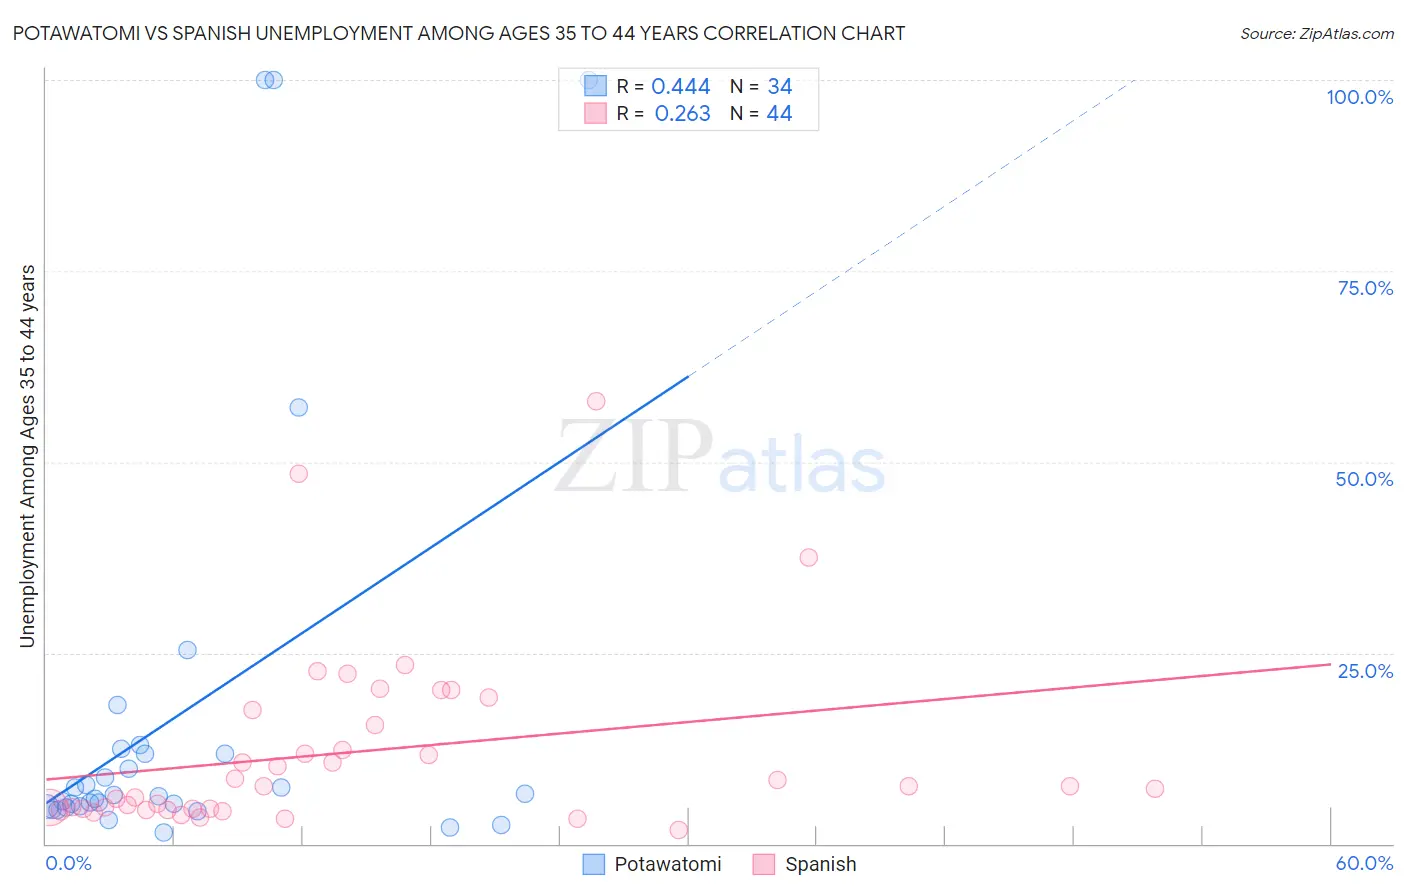 Potawatomi vs Spanish Unemployment Among Ages 35 to 44 years